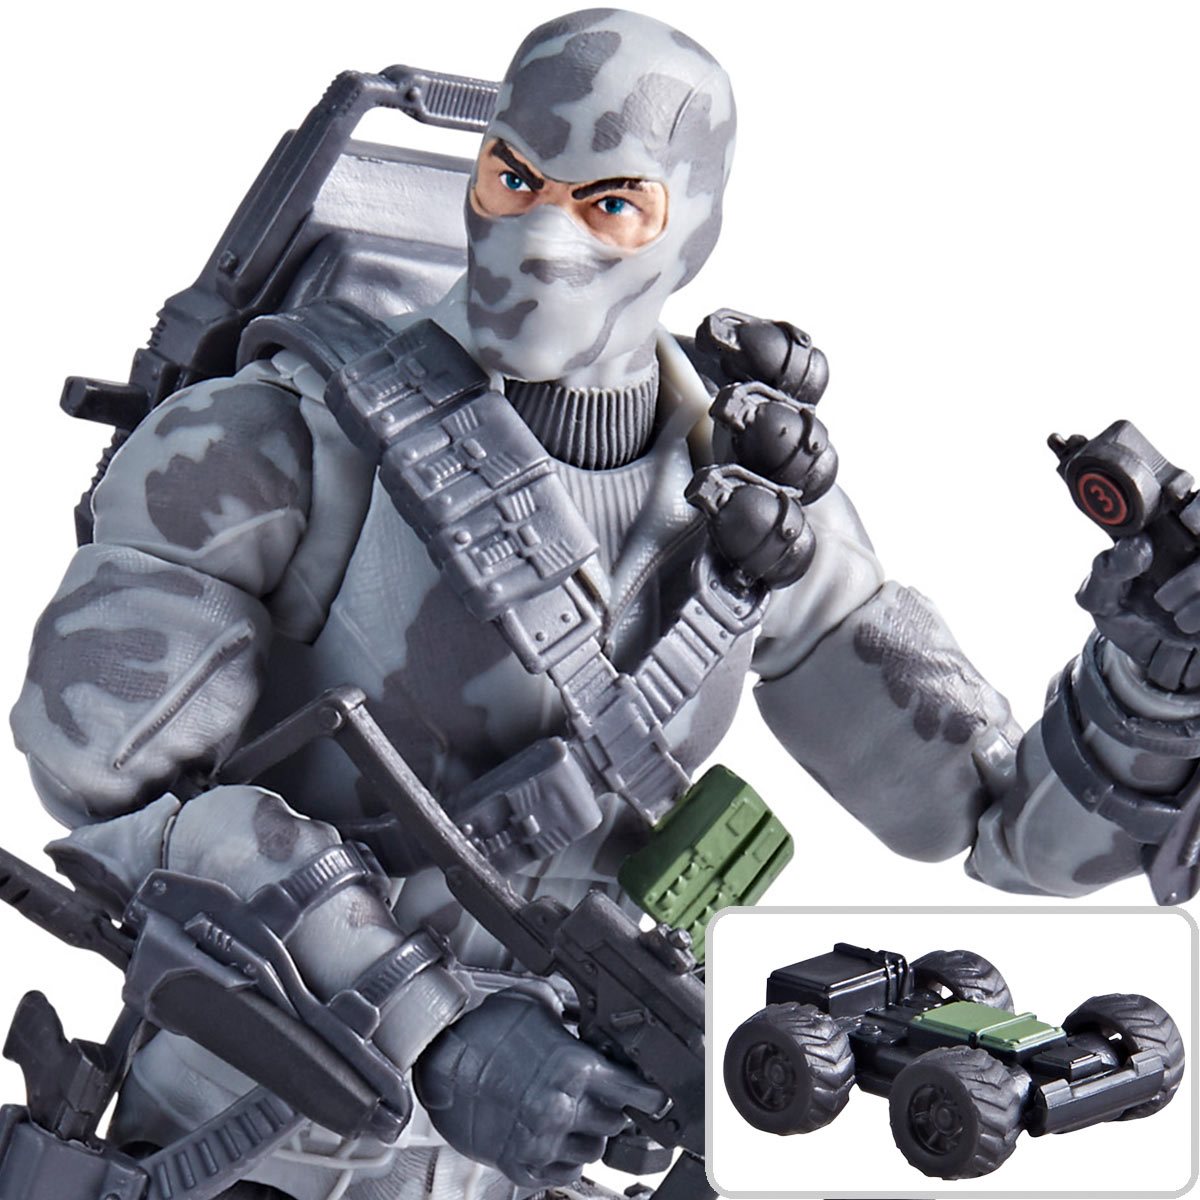 G.I. Joe: Classified Series Firefly Collectible Kids Toy Action Figure for  Boys and Girls Ages 4 5 6 7 8 and Up (6) 